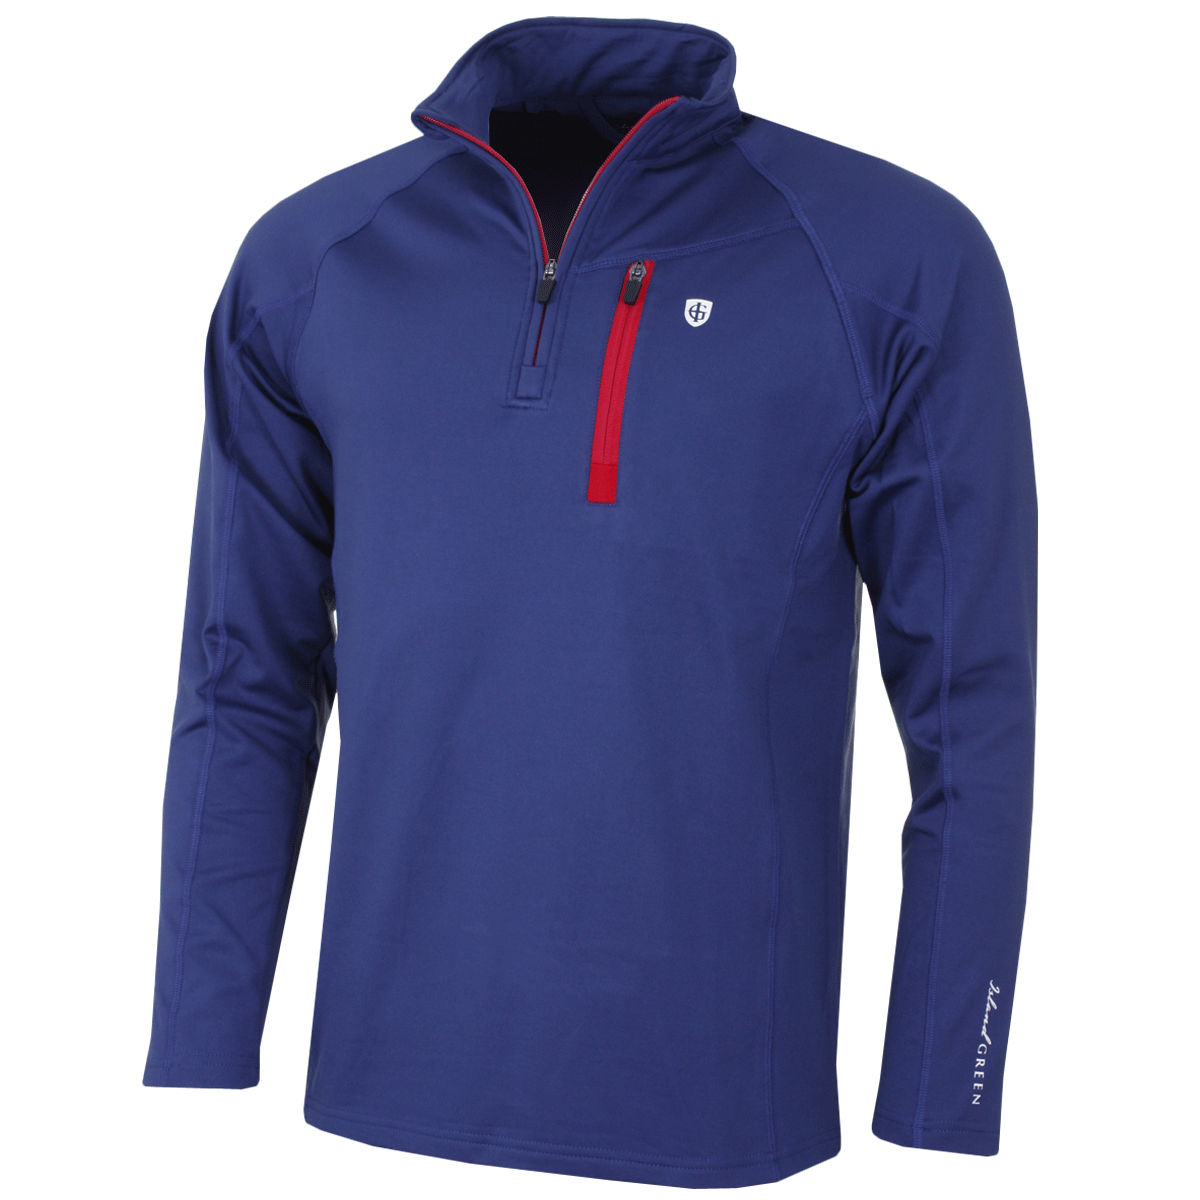 Blue and Red Golf Logo - ISLAND GREEN TOUR LOGO THERMAL 1/4 ZIP GOLF JUMPER - NAVY / RED ...